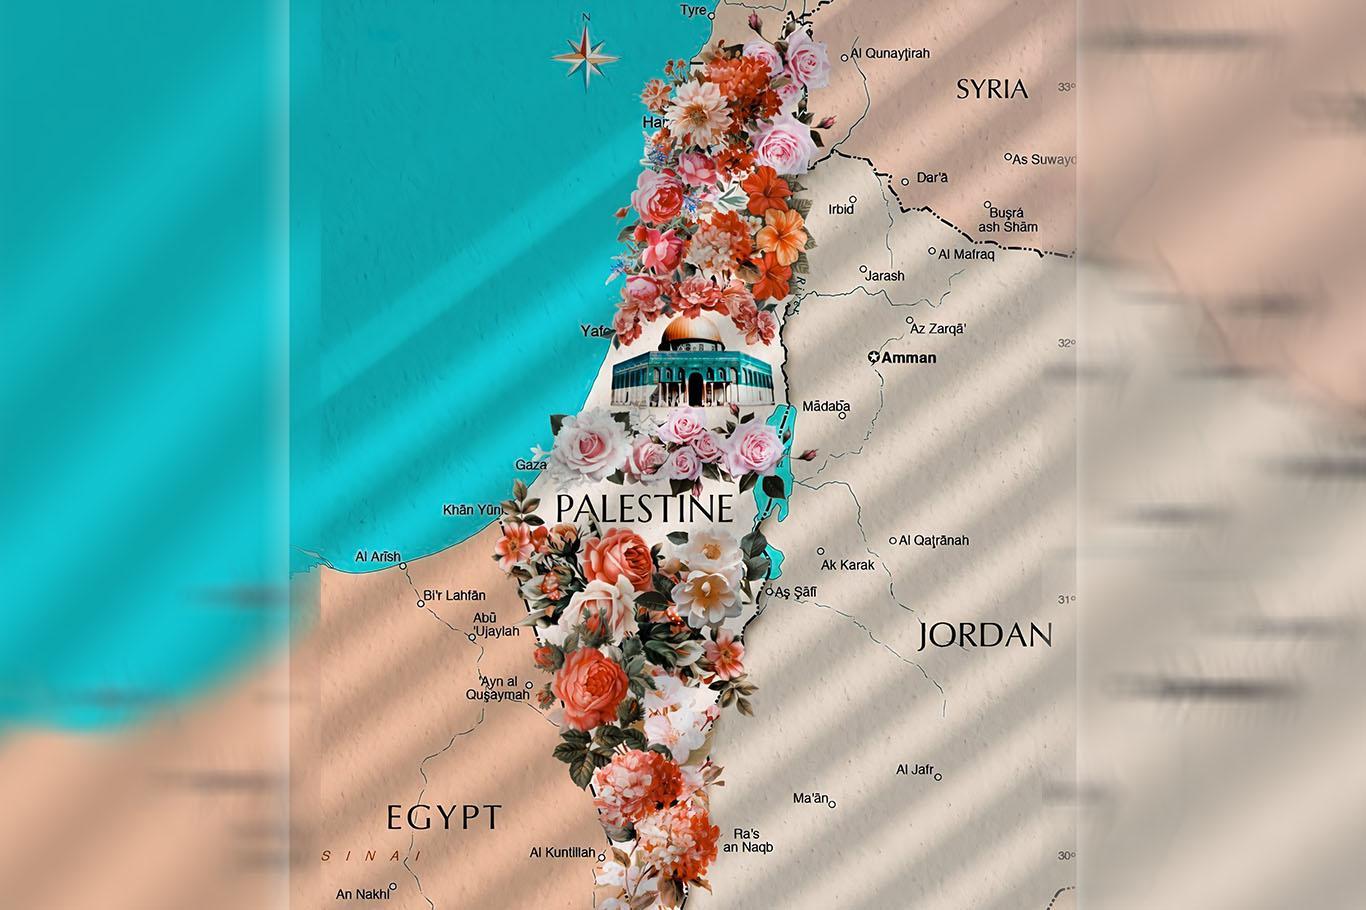 The "Real Map" of Palestine gets appreciation globally